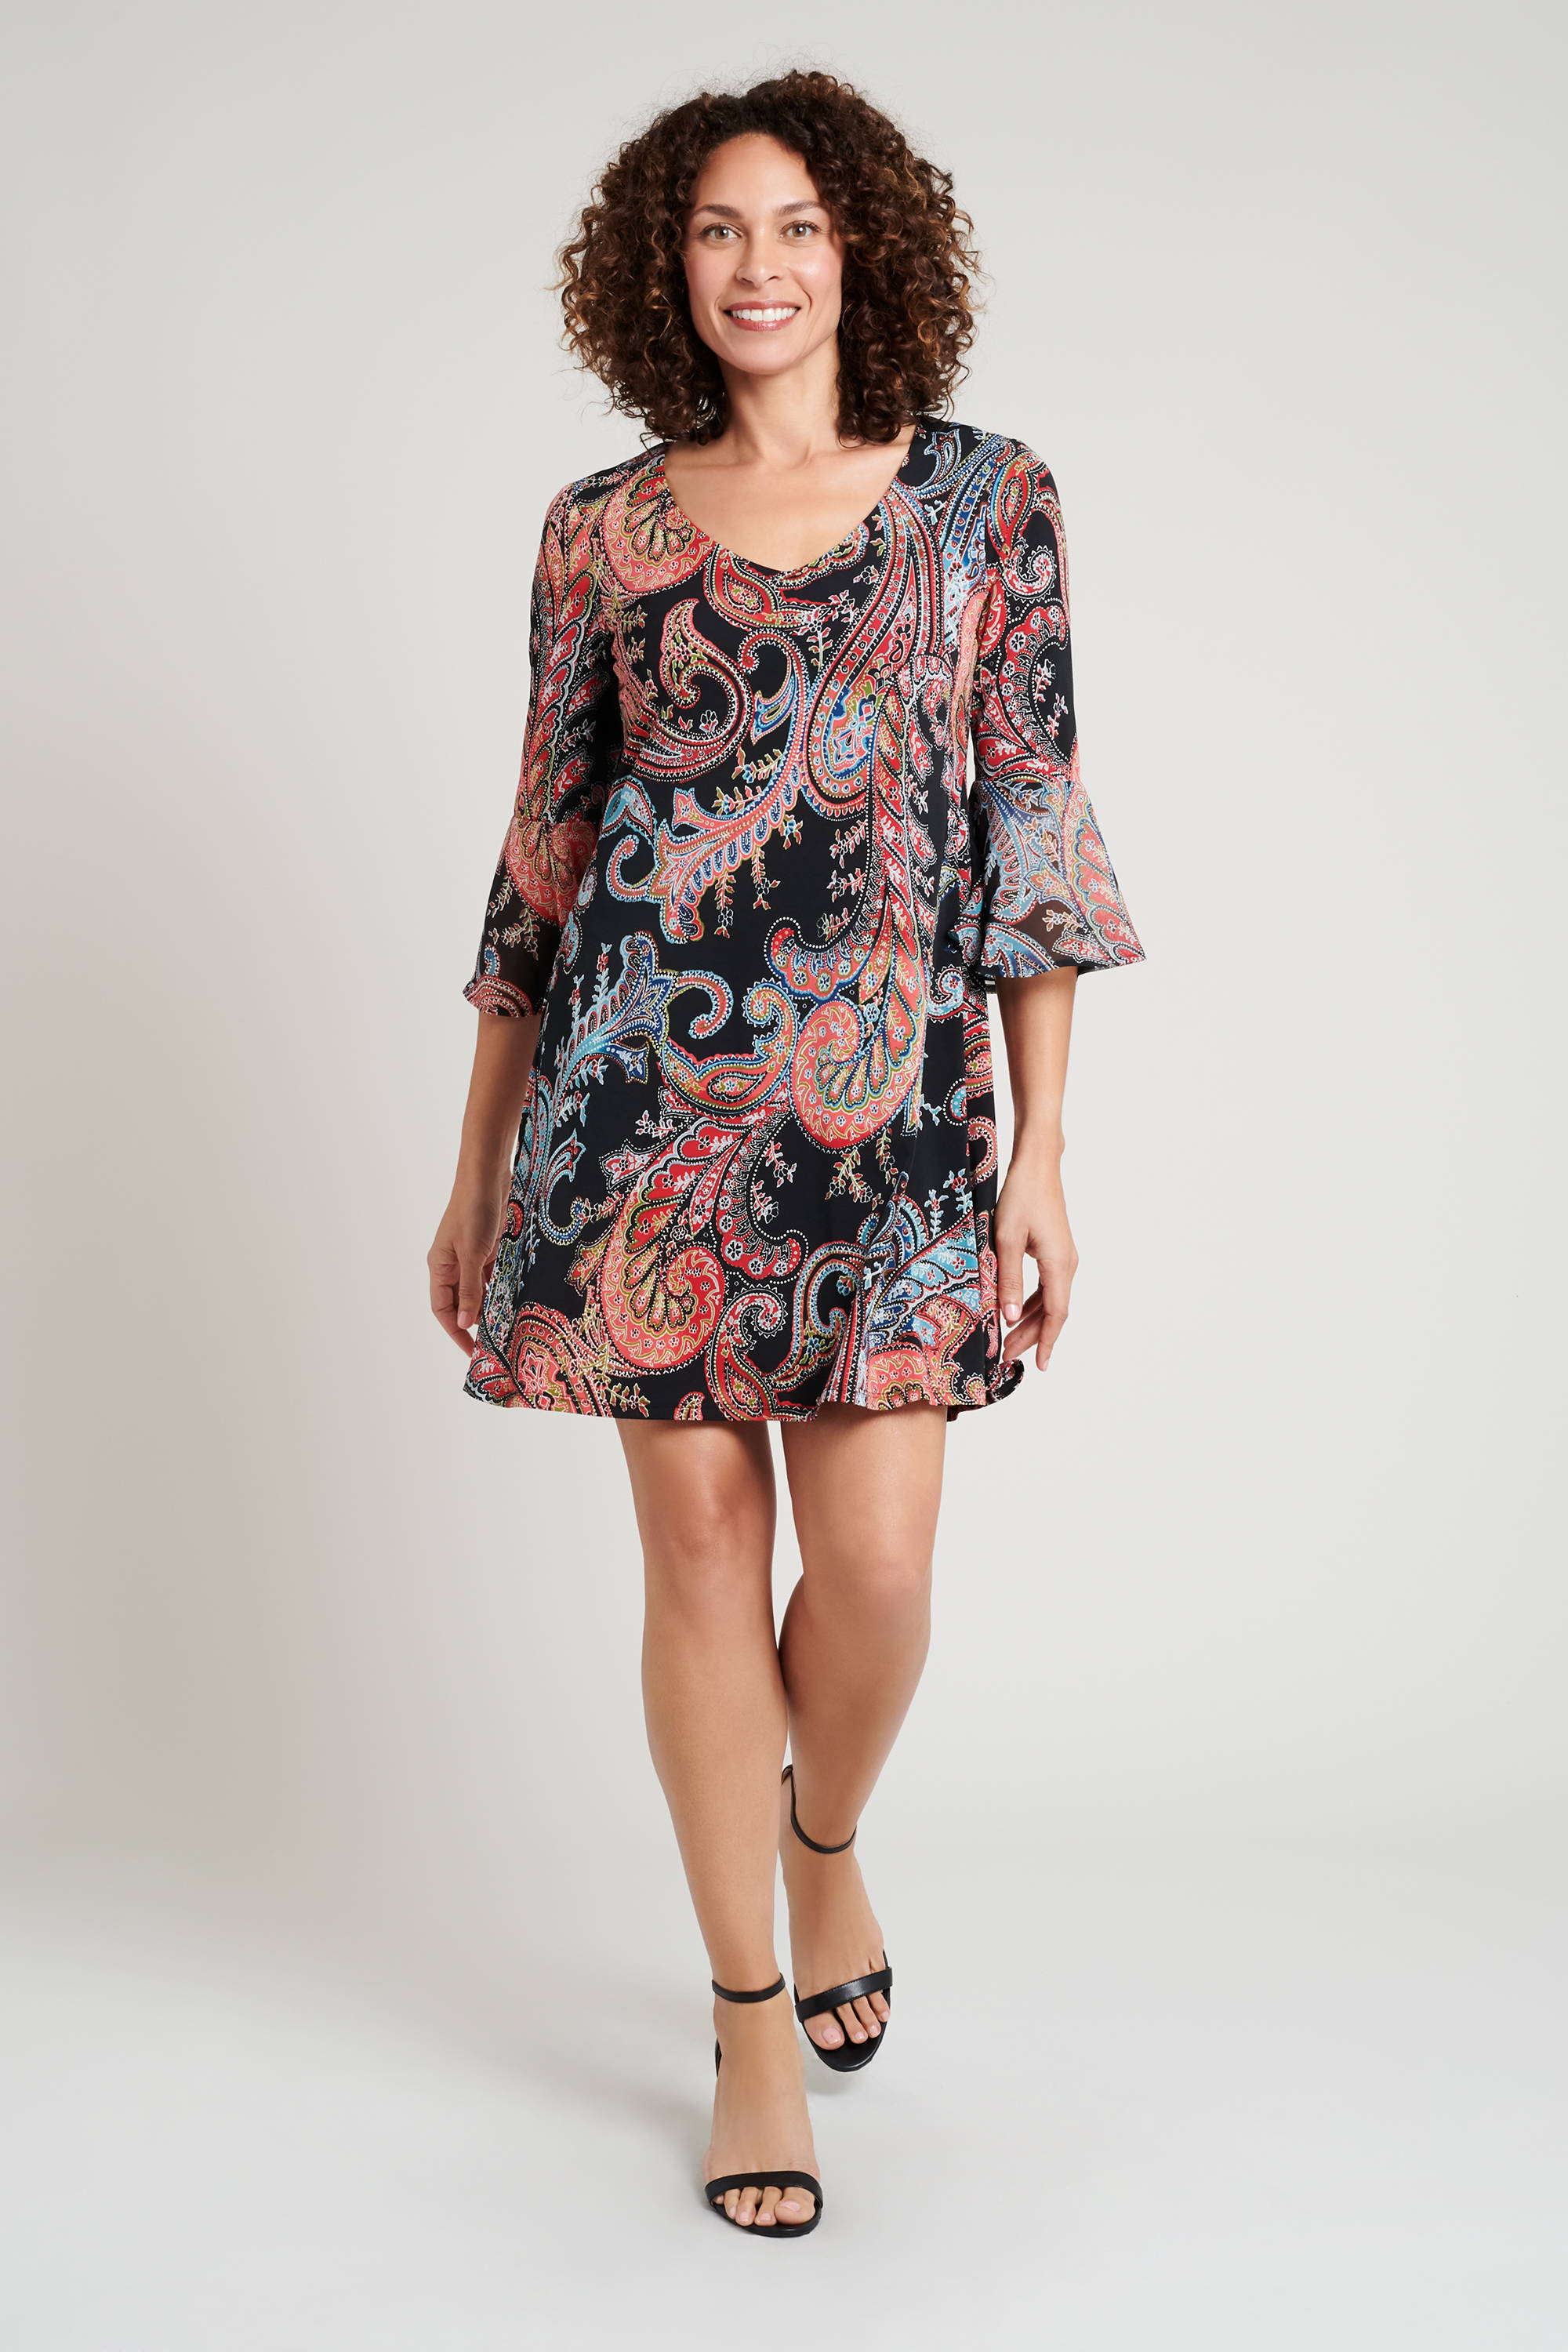 woman posing in half sleeve paisley print short connected apparel dress with matching printed chiffon sleeve accents